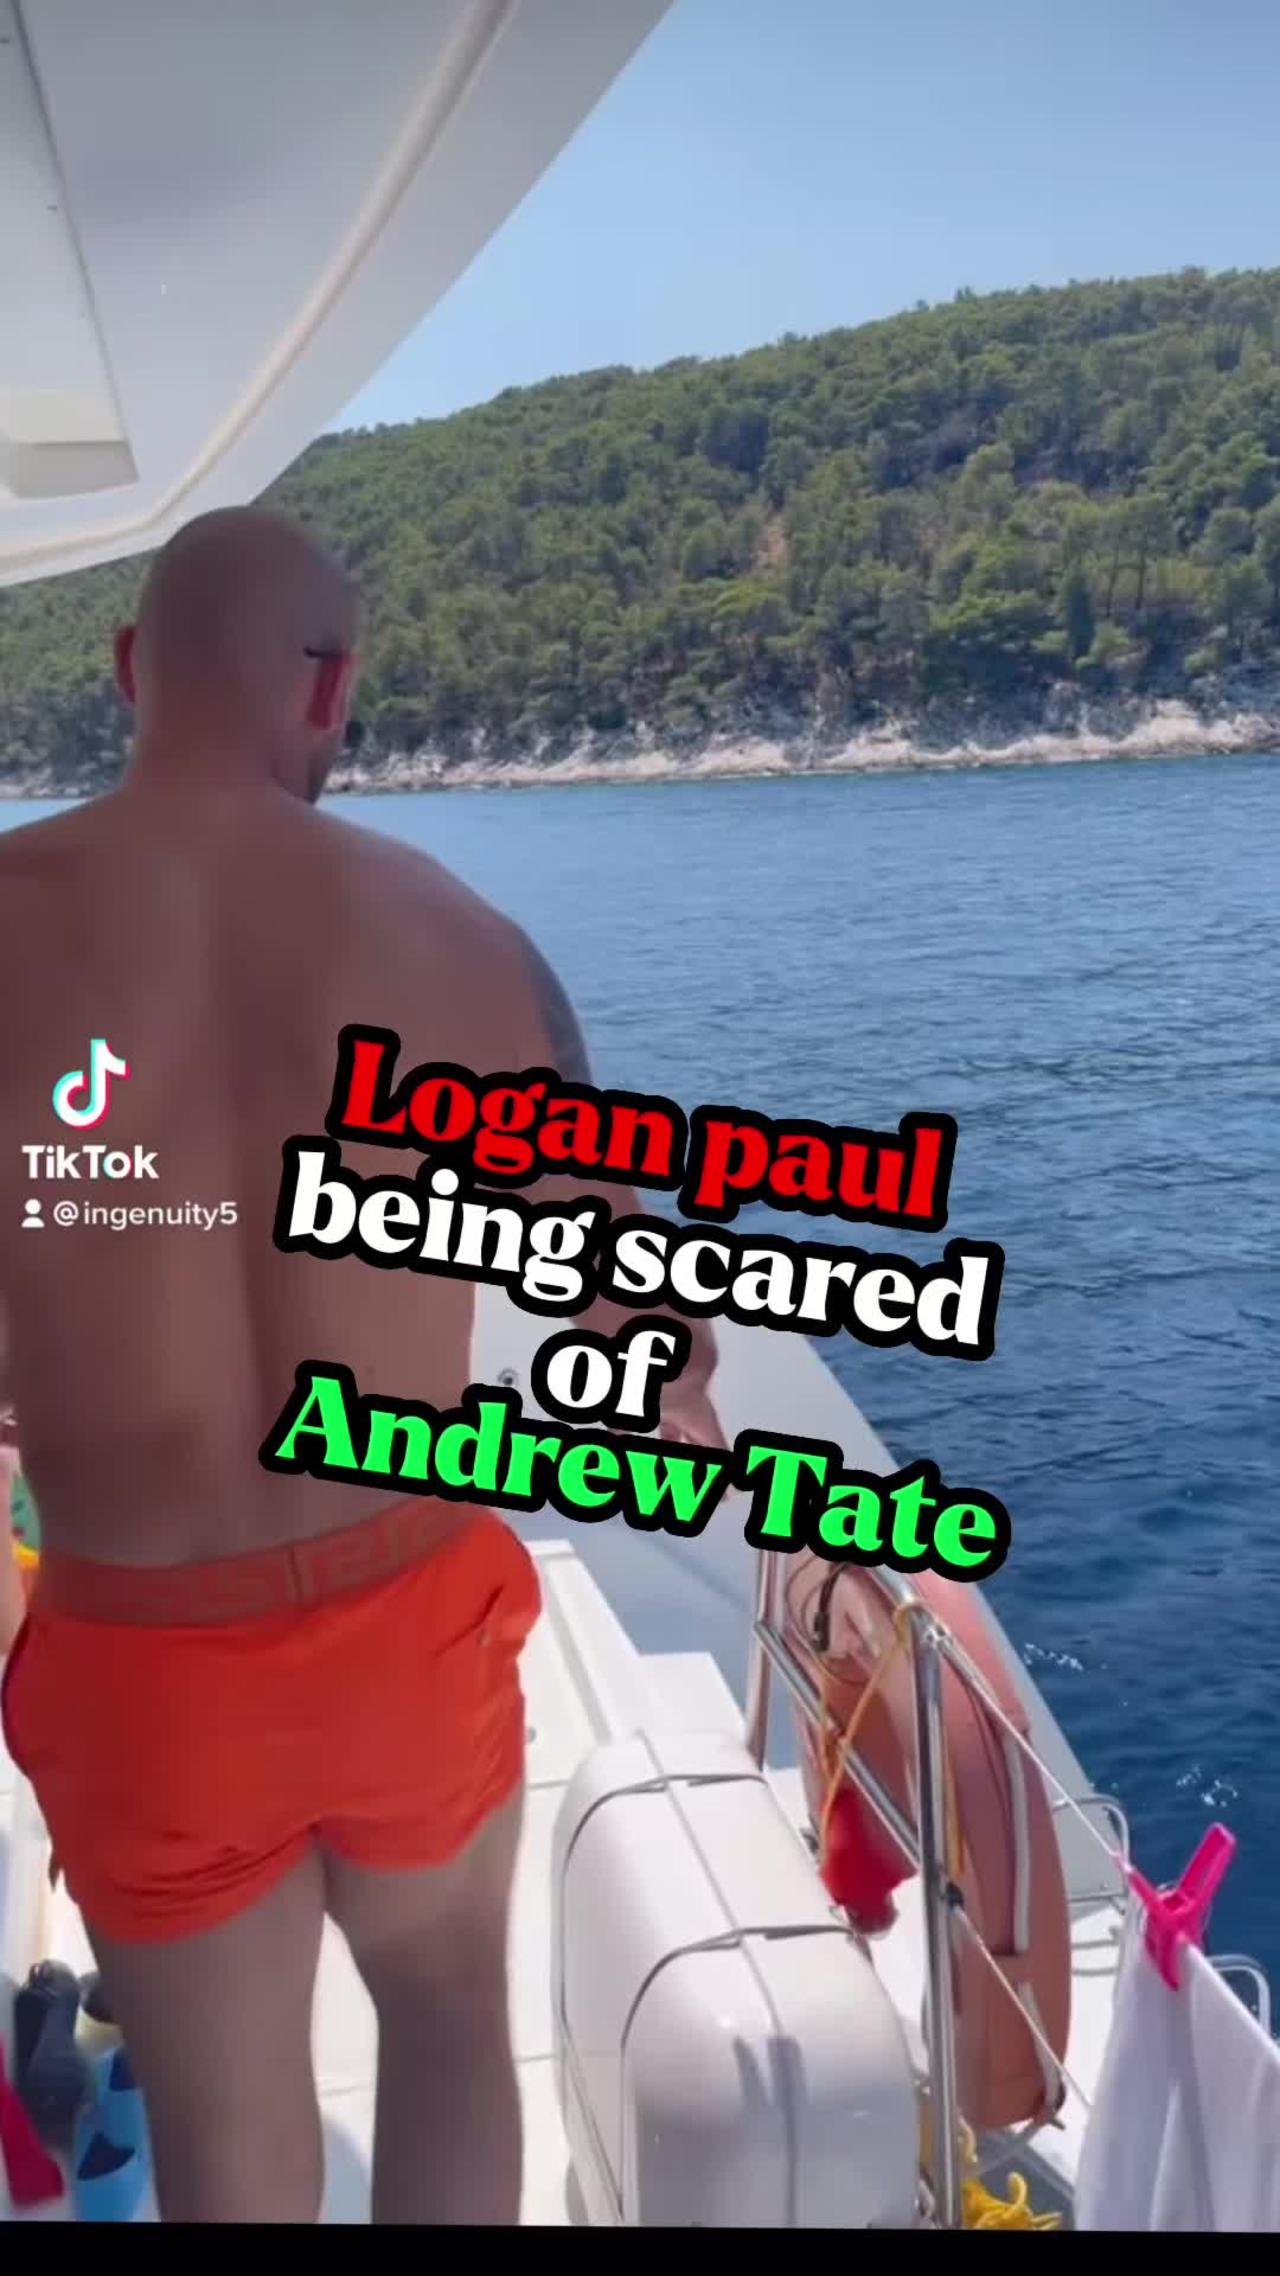 Logan Paul being scared of Andrew Tate